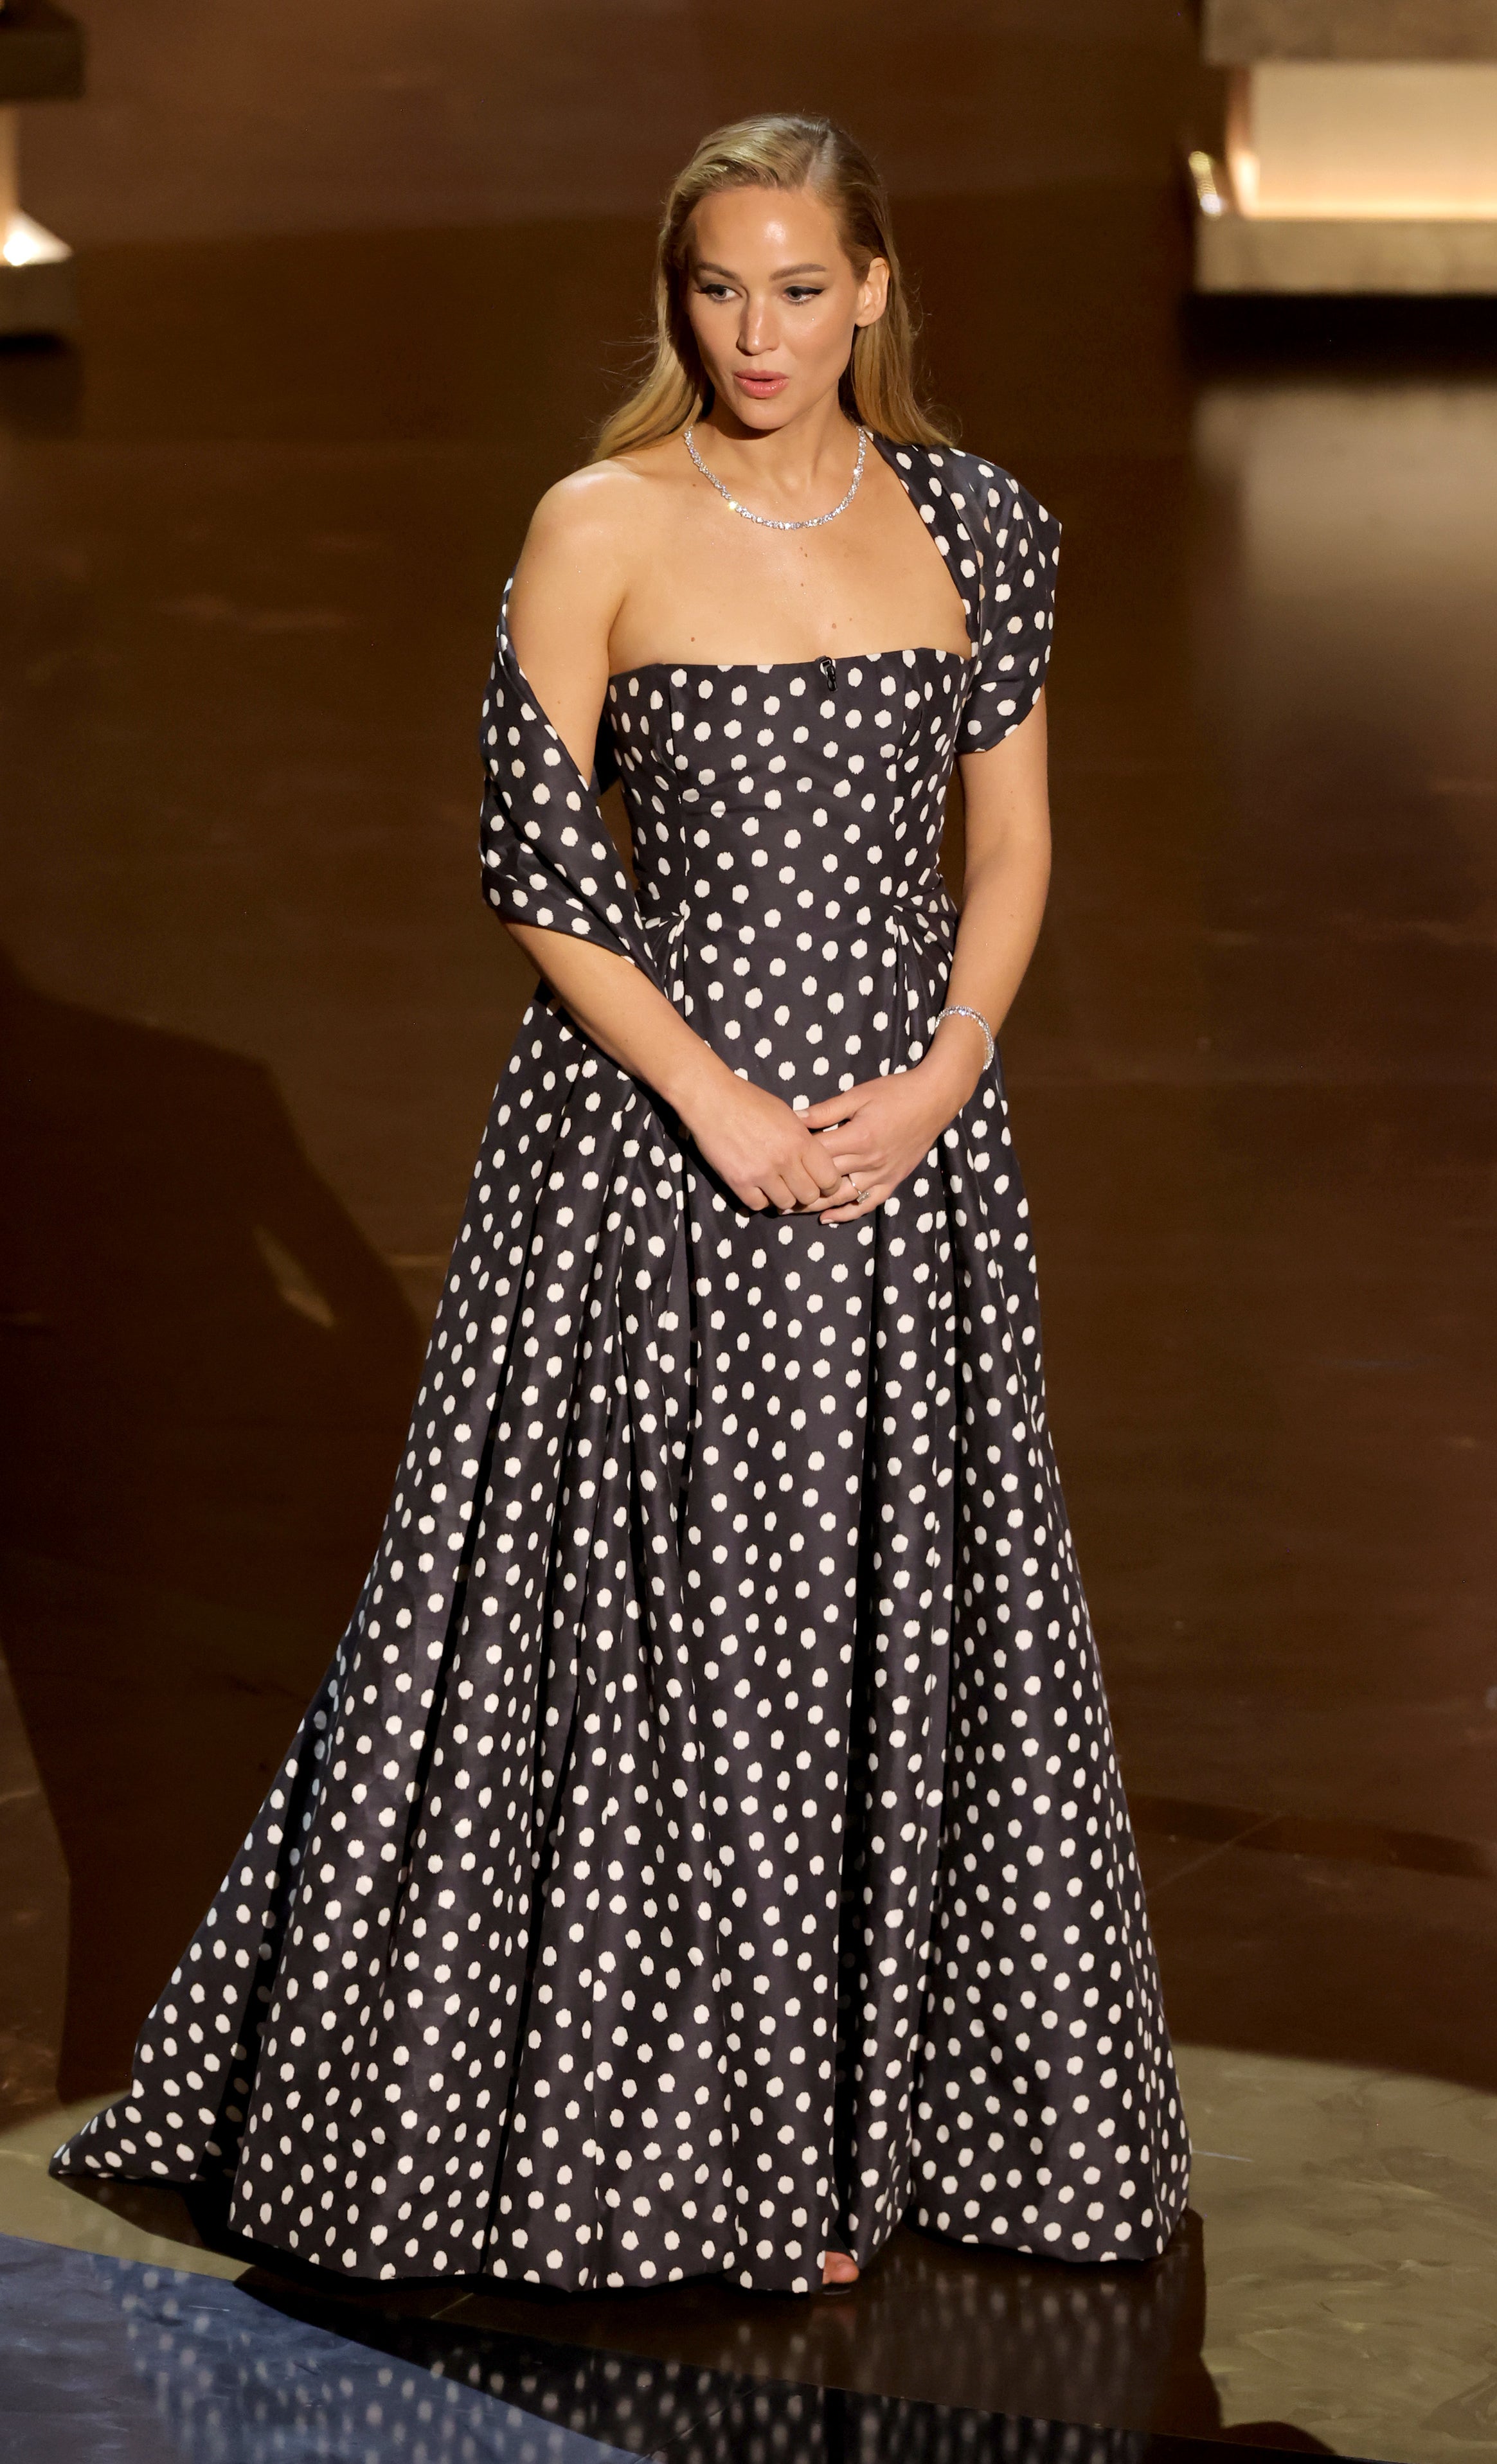 Jennifer in a polka dot off-shoulder gown and pearl necklace standing on stage